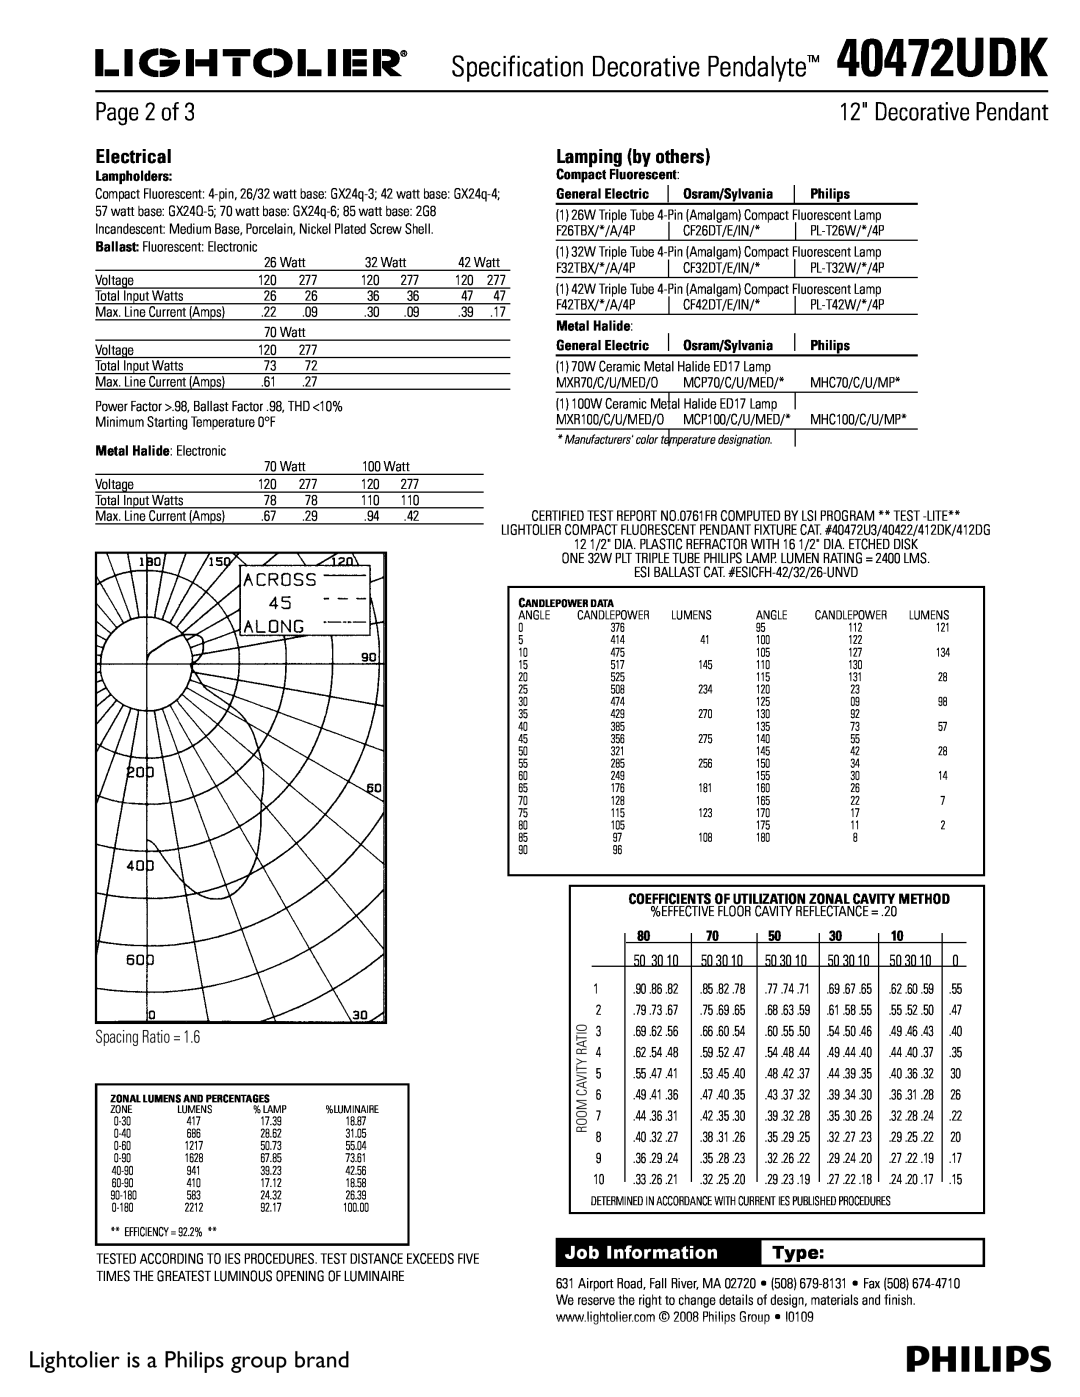 Lightolier 40472UDK Page 2 of, Electrical, Lamping by others, Spacing Ratio =, Type, Decorative Pendant, Job Information 